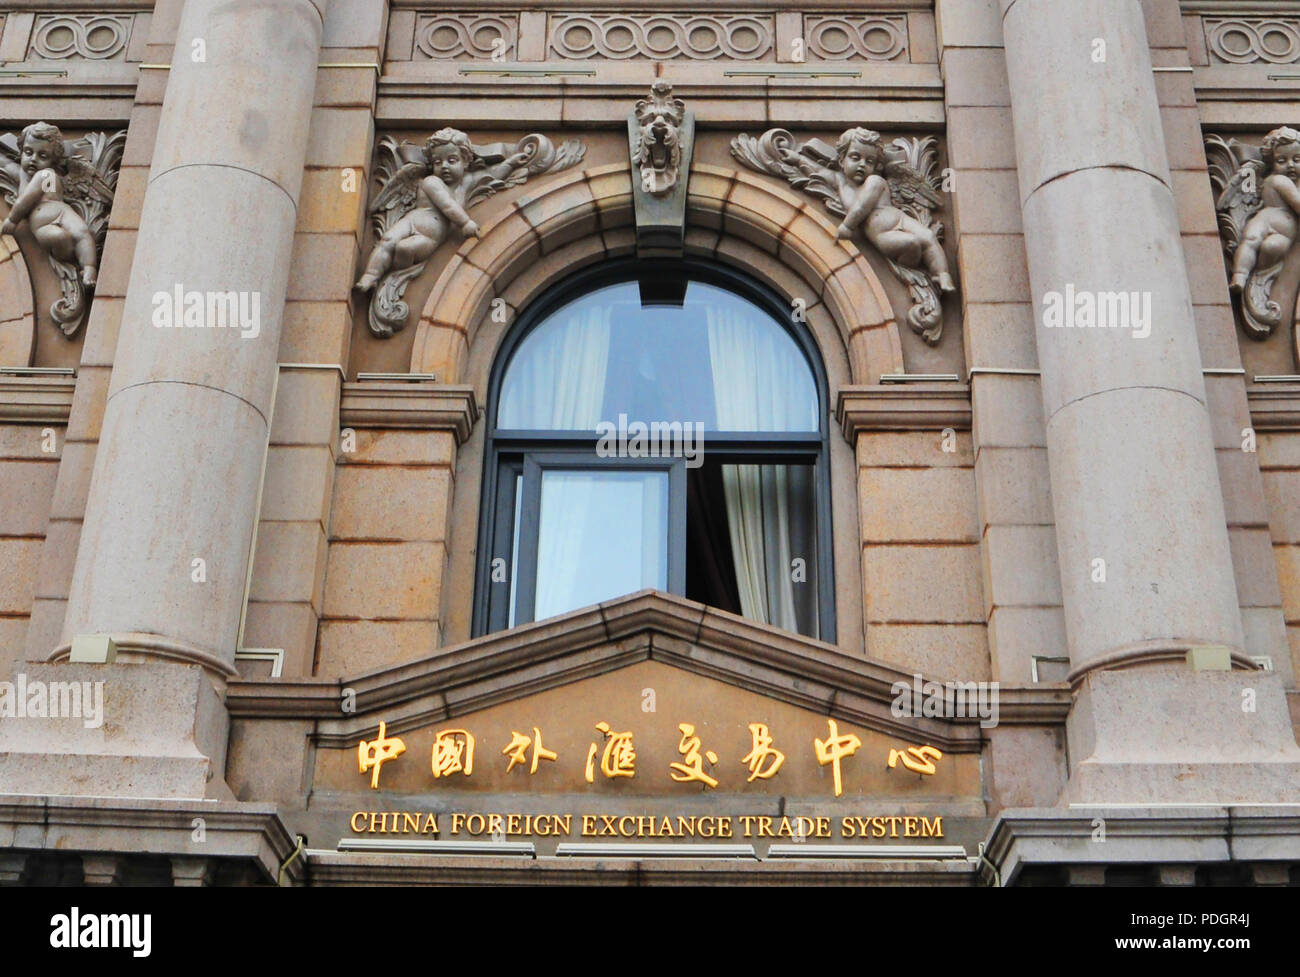 China Foreign Exchange Trade System building, The Bund, Shanghai, China Stock Photo